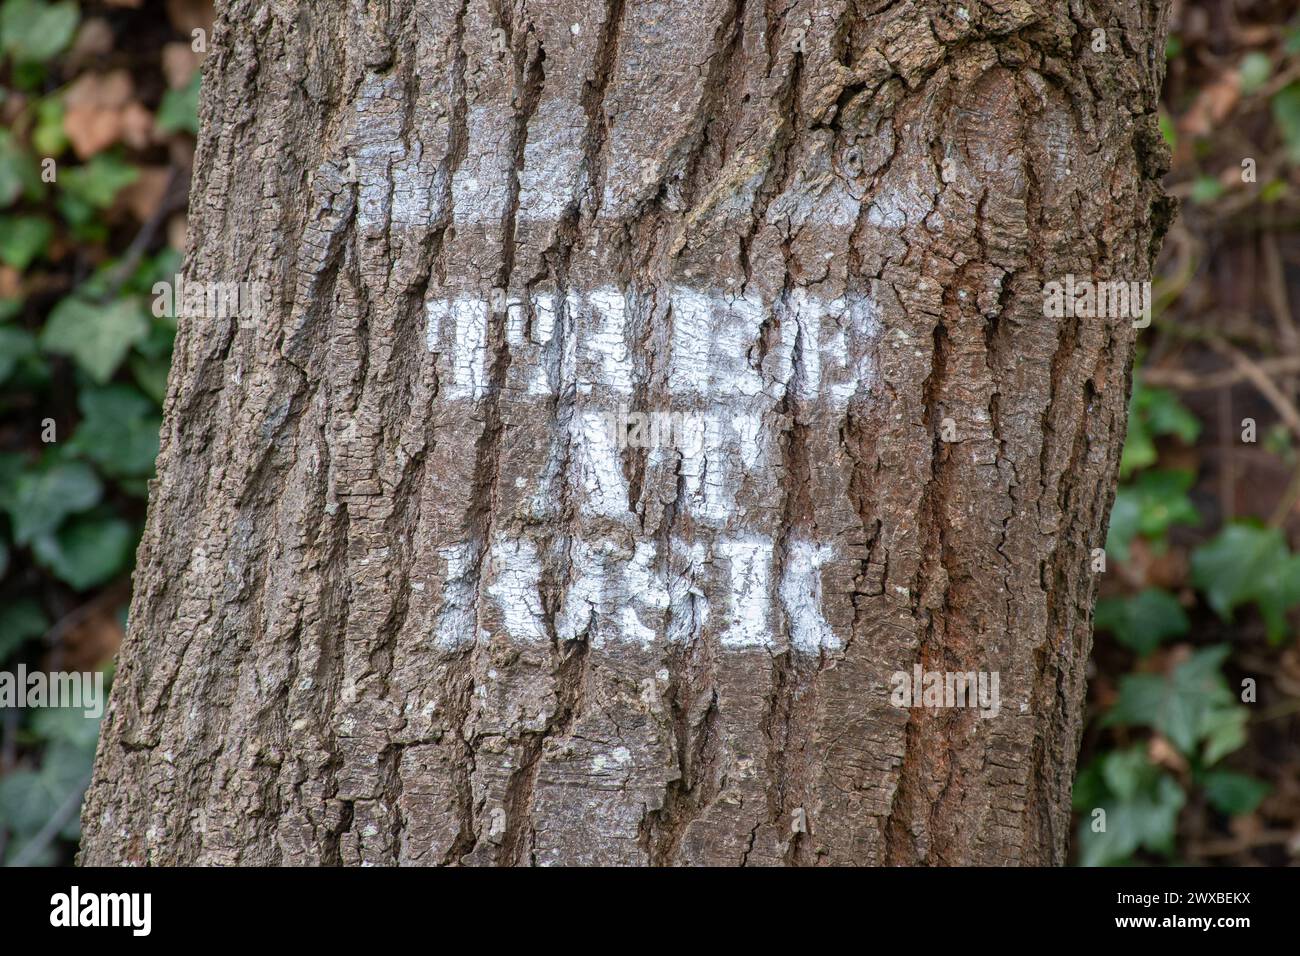 Tree at Risk text stamped onto a tree due to be cut down, protecting trees, environmental activism Stock Photo